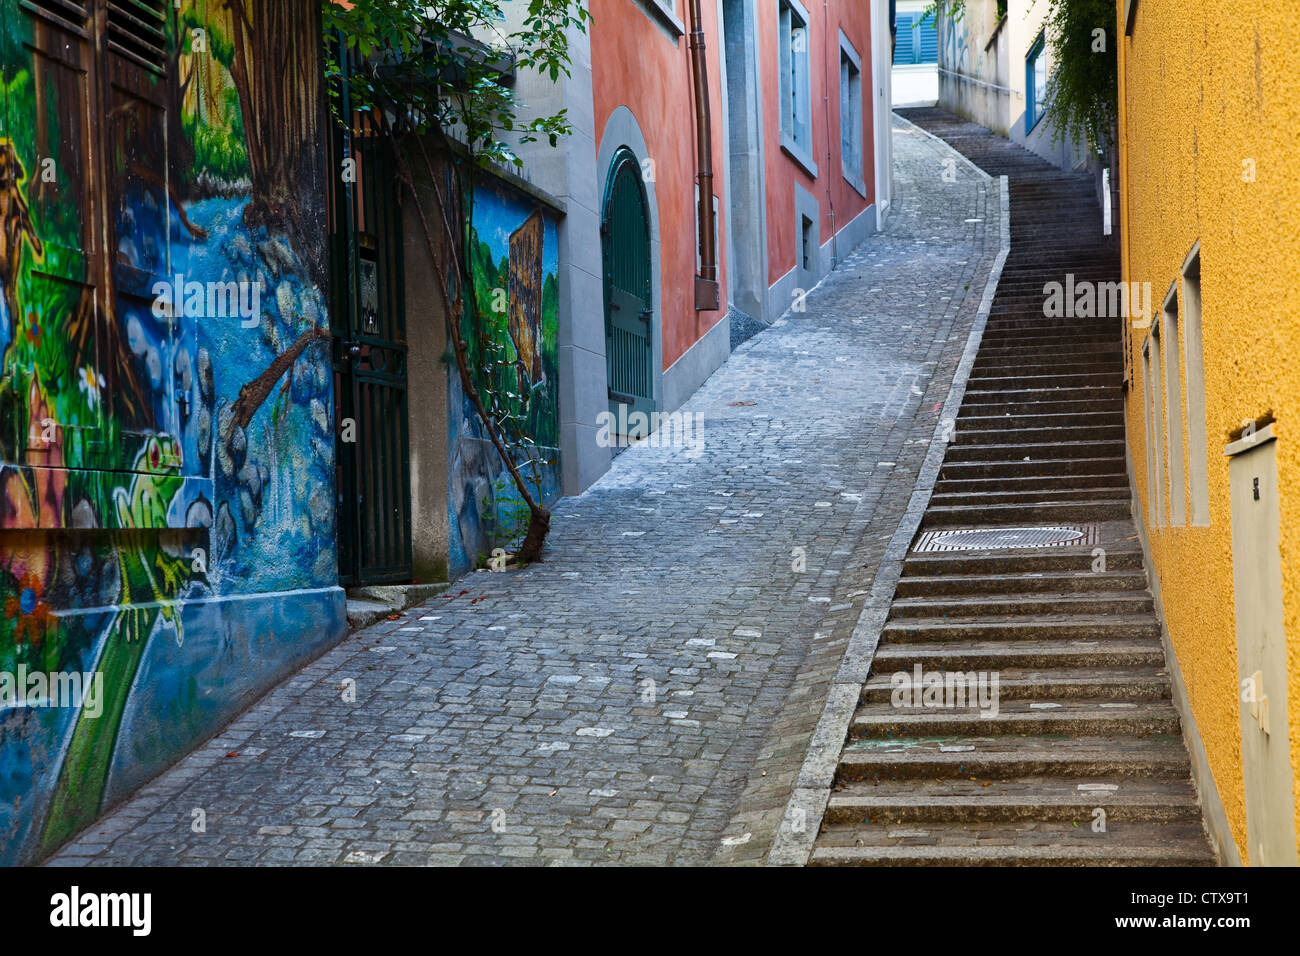 A steep alley with staircase in Zurich's old town, Switzerland Stock Photo  - Alamy